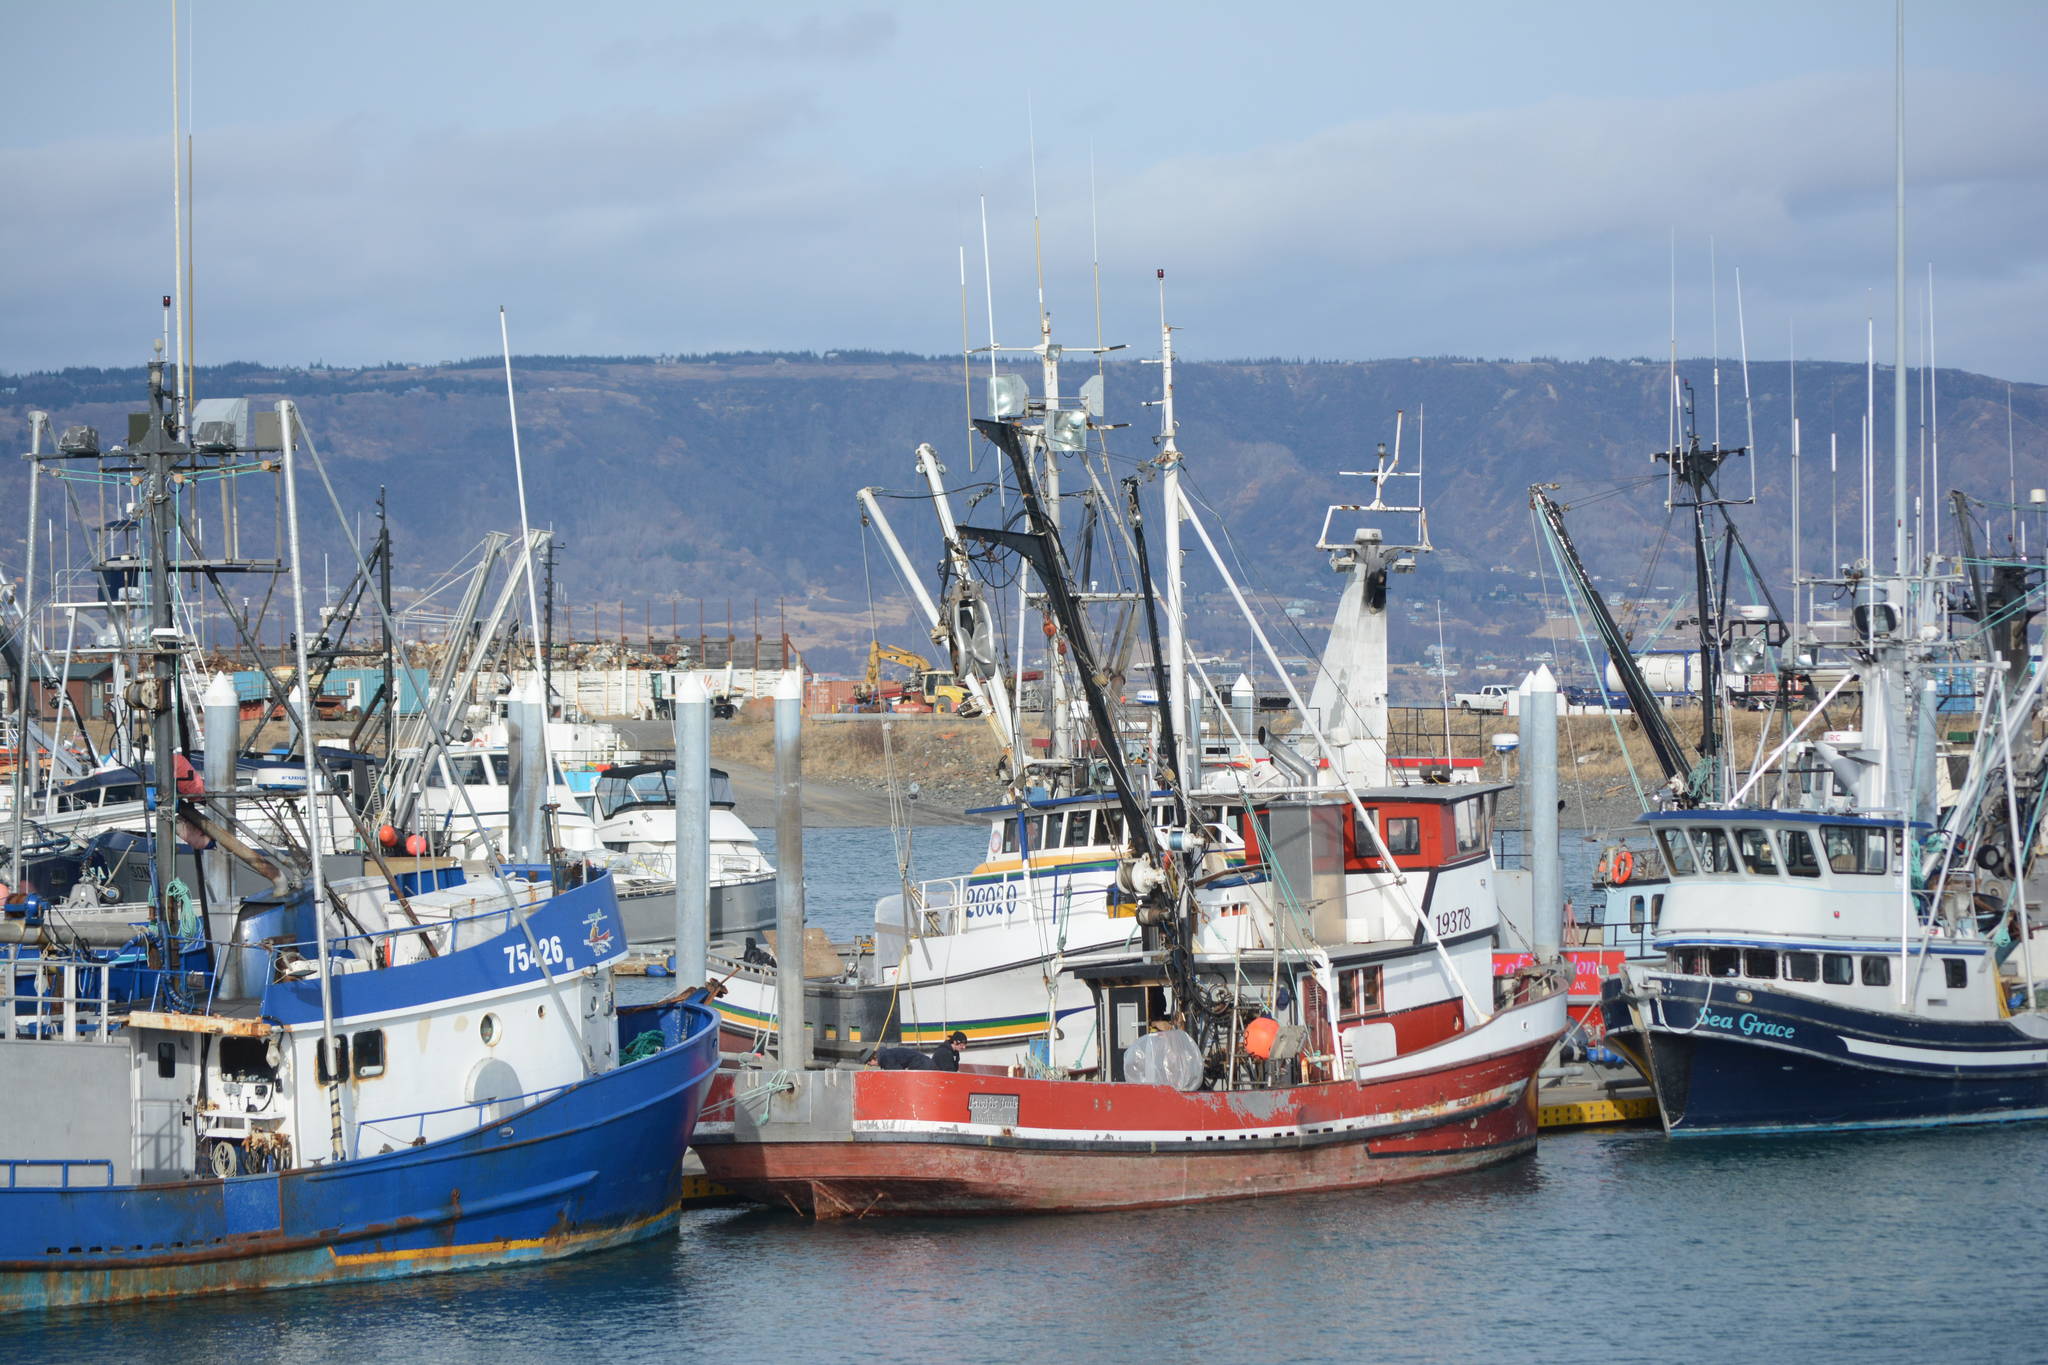 Seawatch: Bristol Bay salmon run forecast to be strong